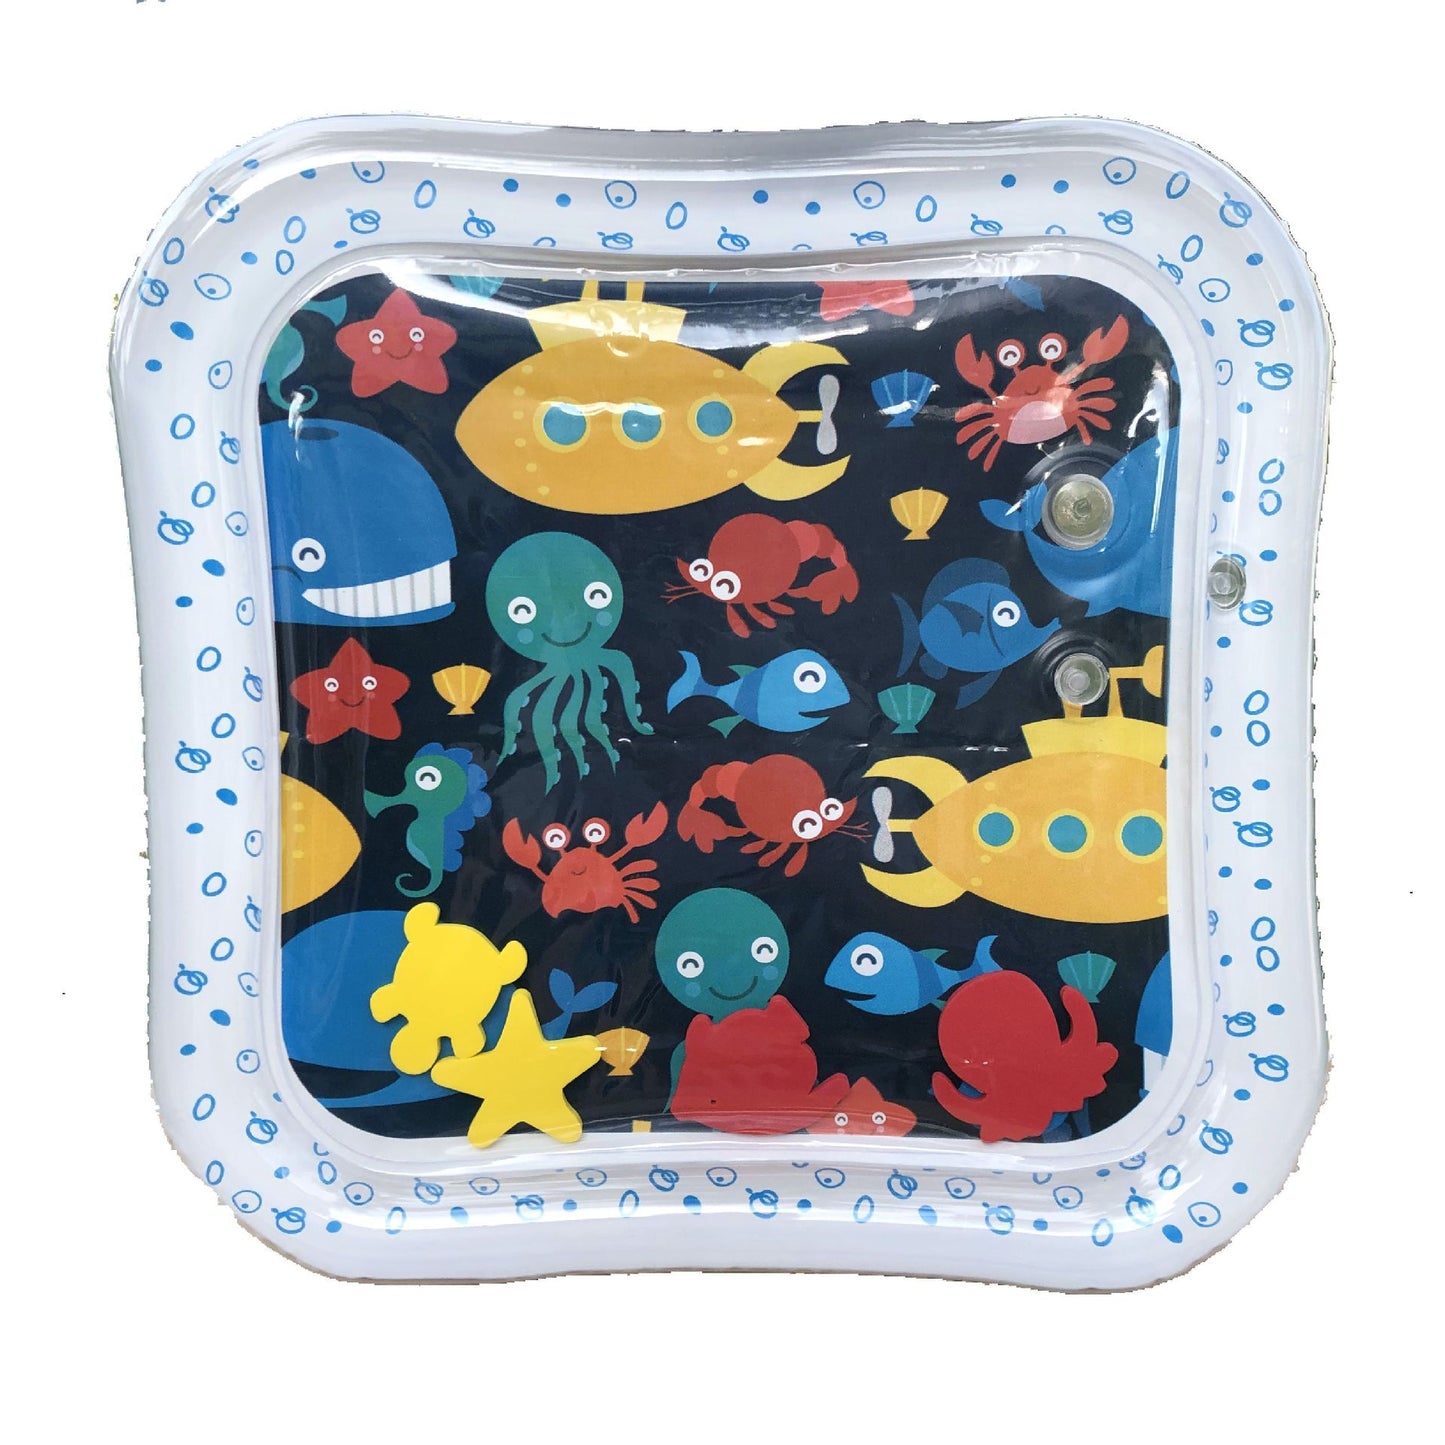 Children's Water Cushion Inflatable Water Cushion Inflatable Ice Pad Toy